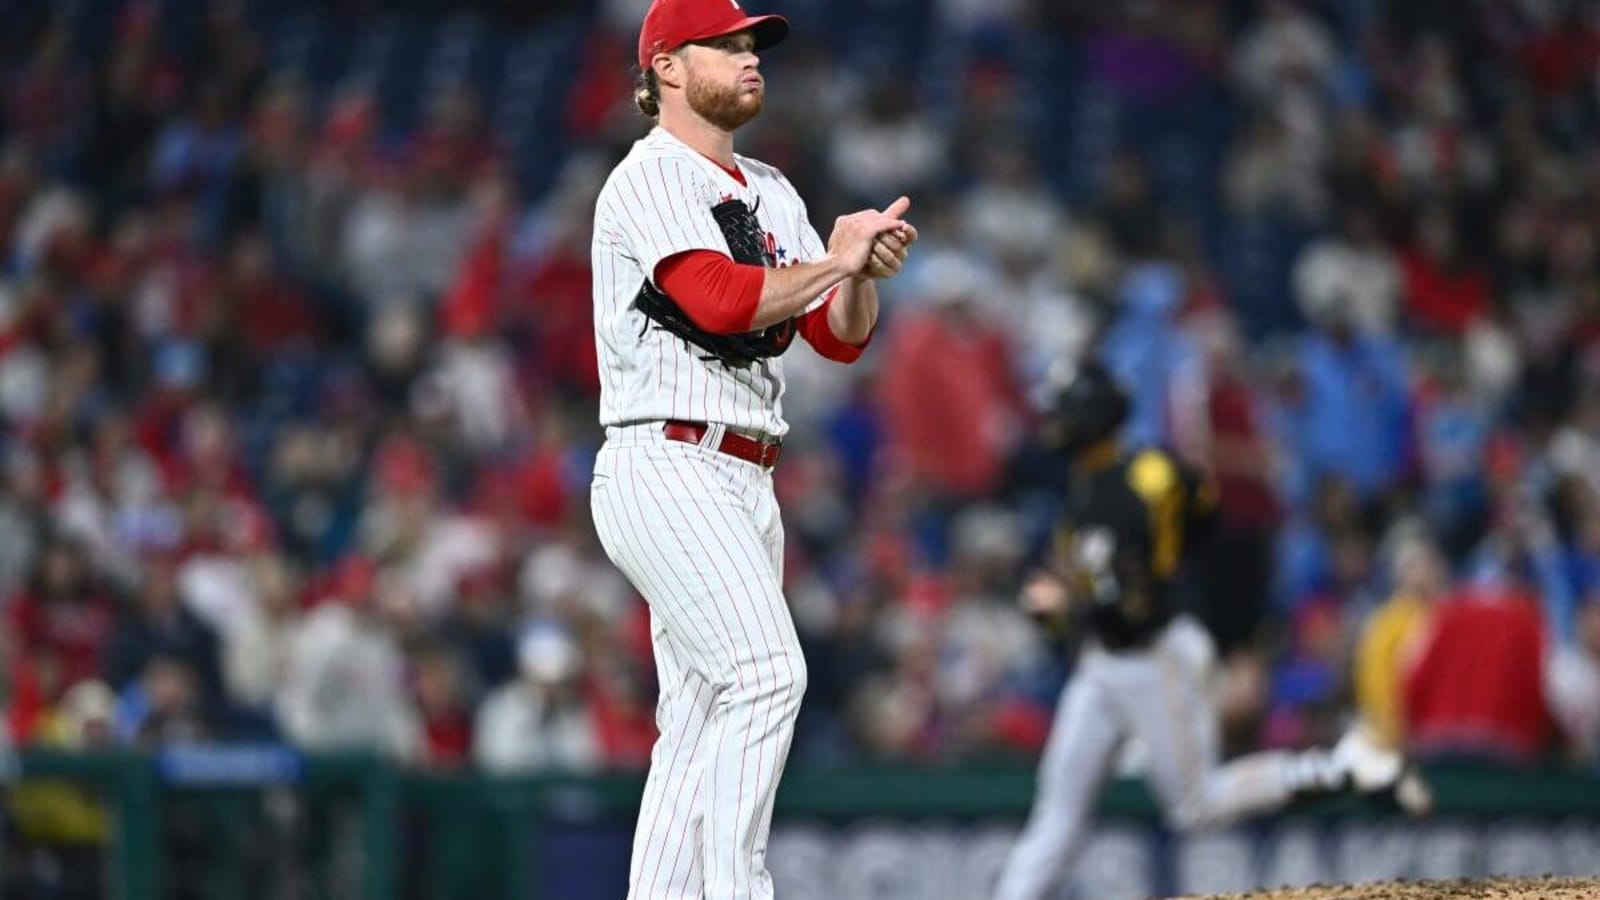 Phillies Get Outdueled in Game 3 Loss of NLCS